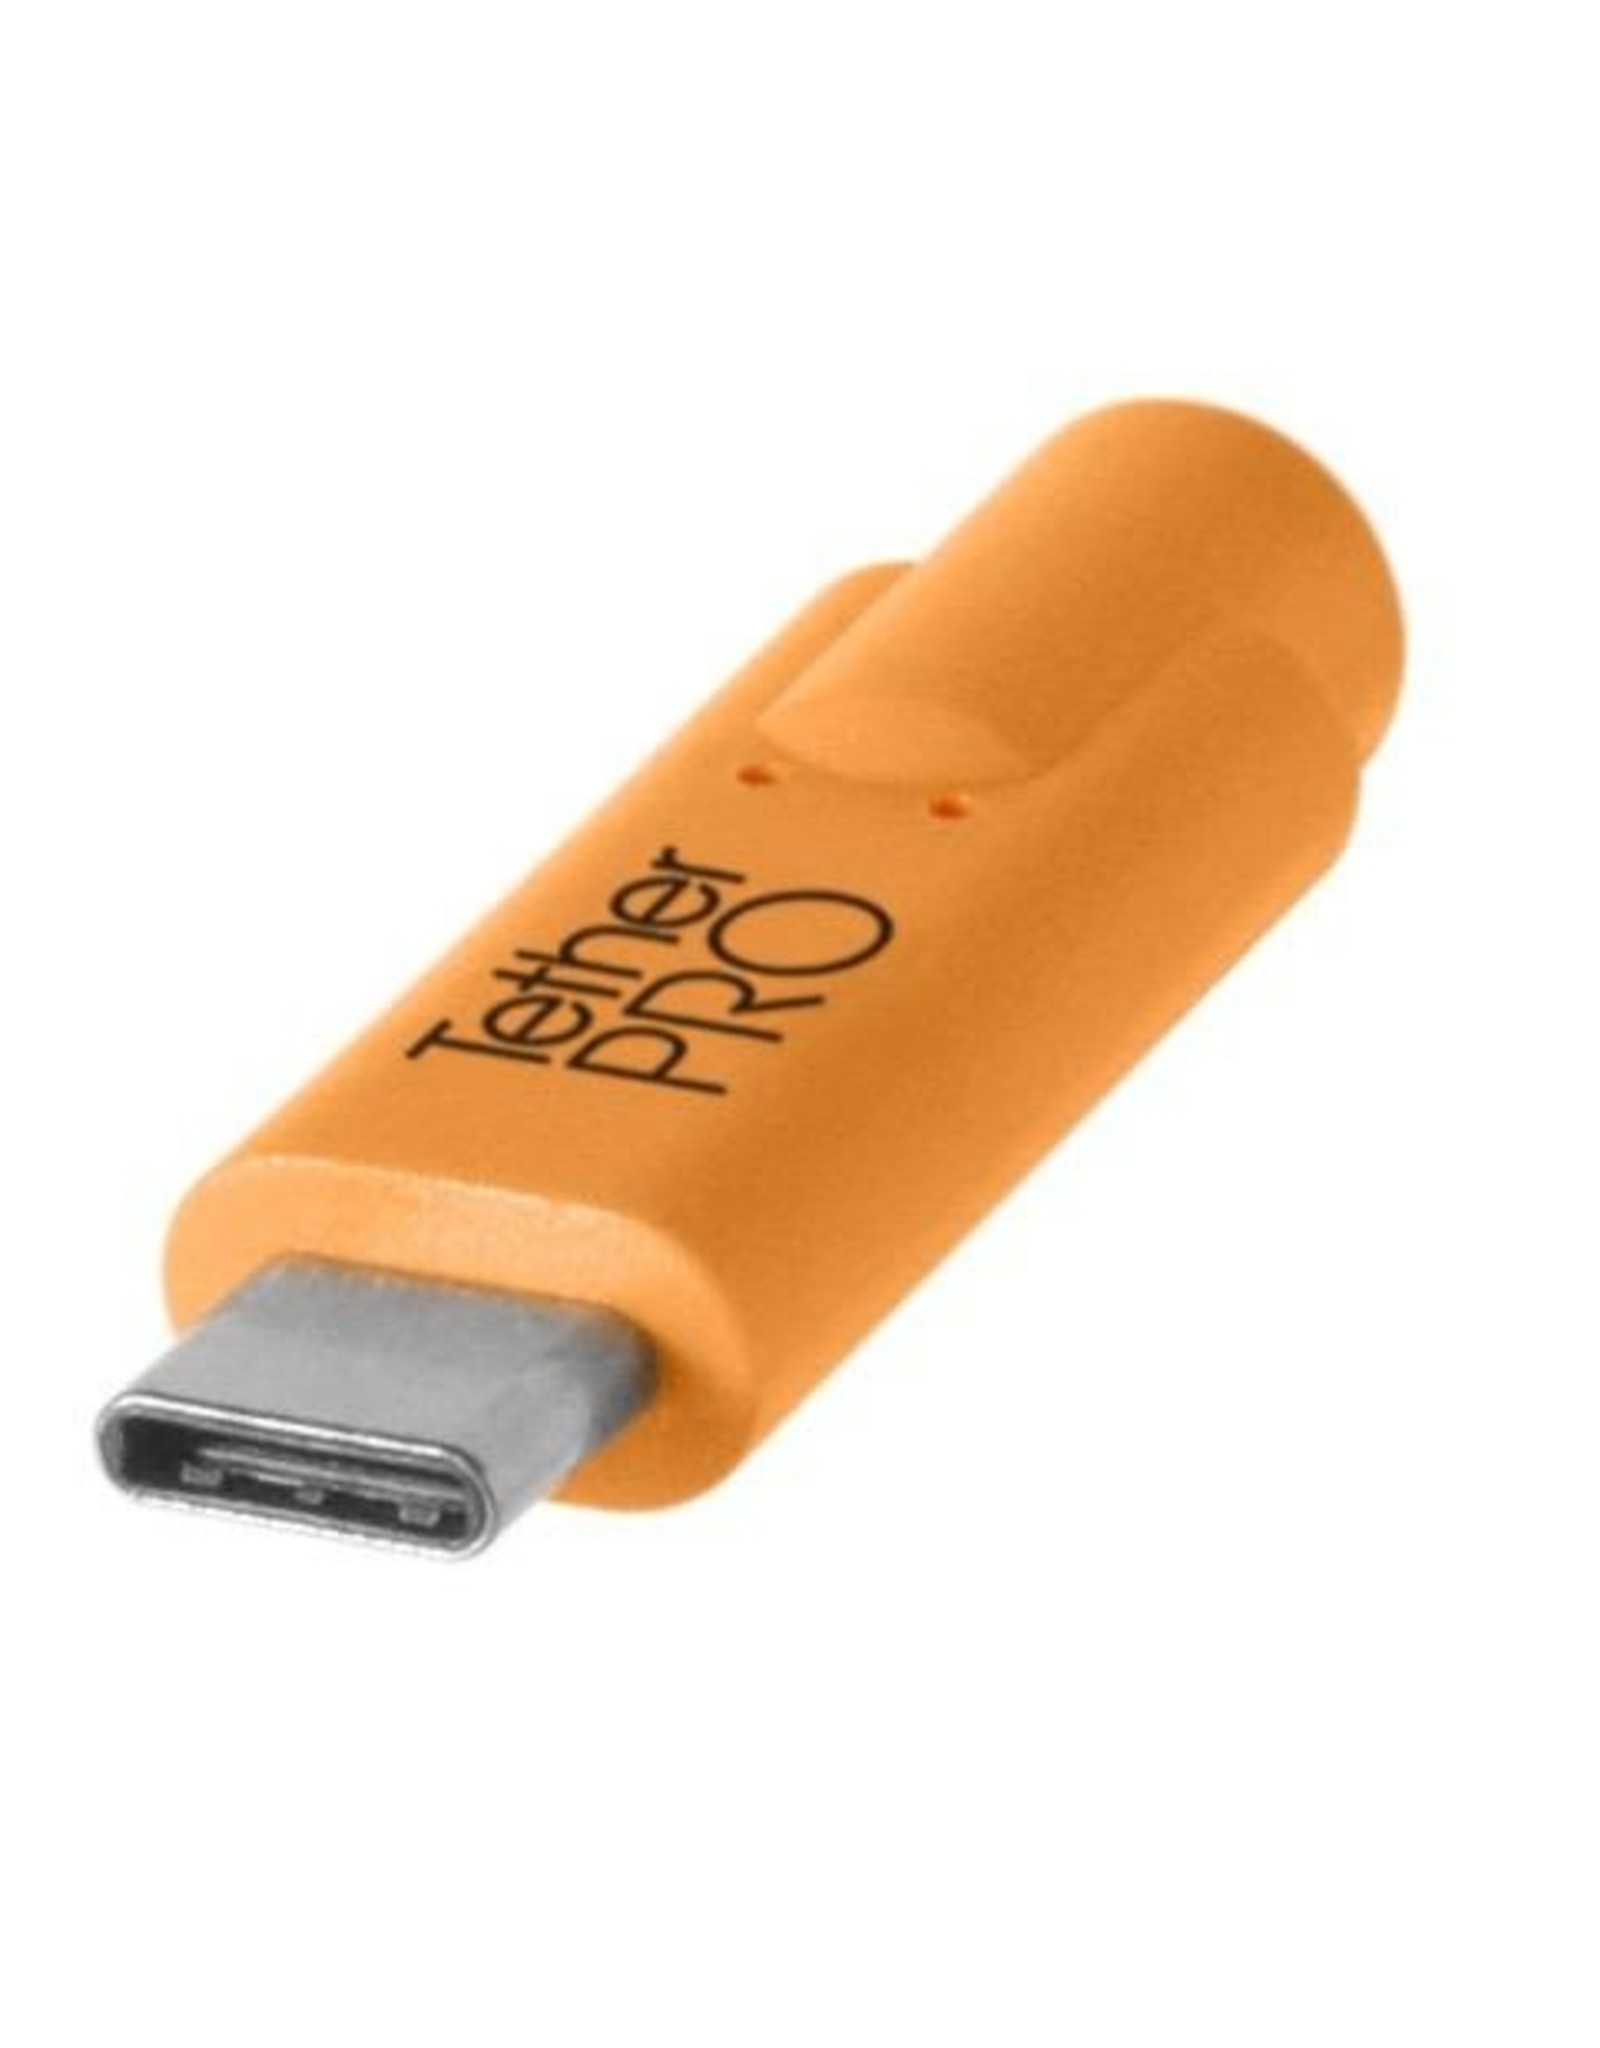 Tether Tools Tether Tools TetherPro USB-C to USB Female Adapter (extender), 15' (4.6m), High-Visibility Orange